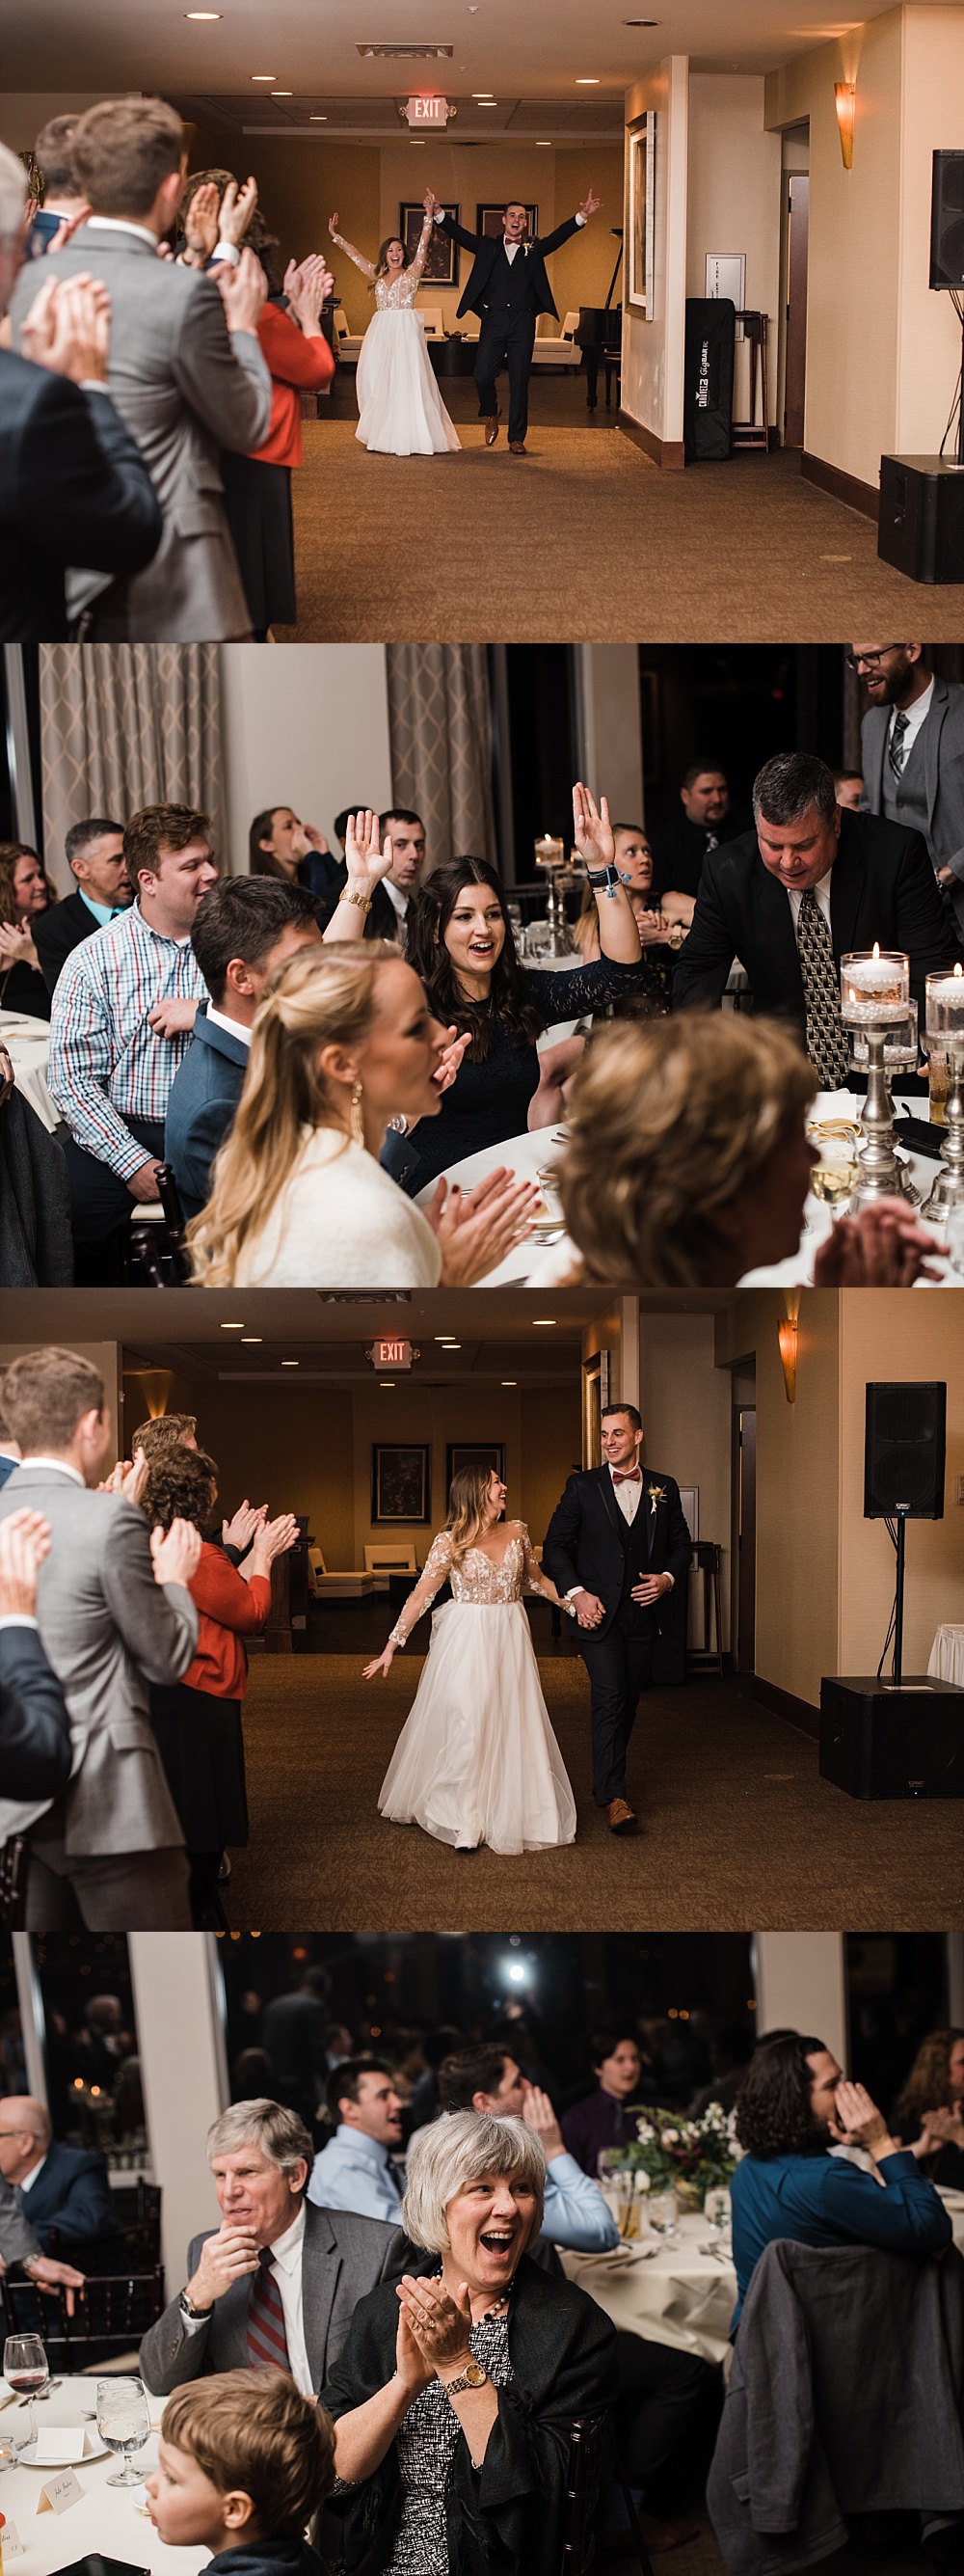 Guests cheering for bride and groom as they make their grand entrance to their reception